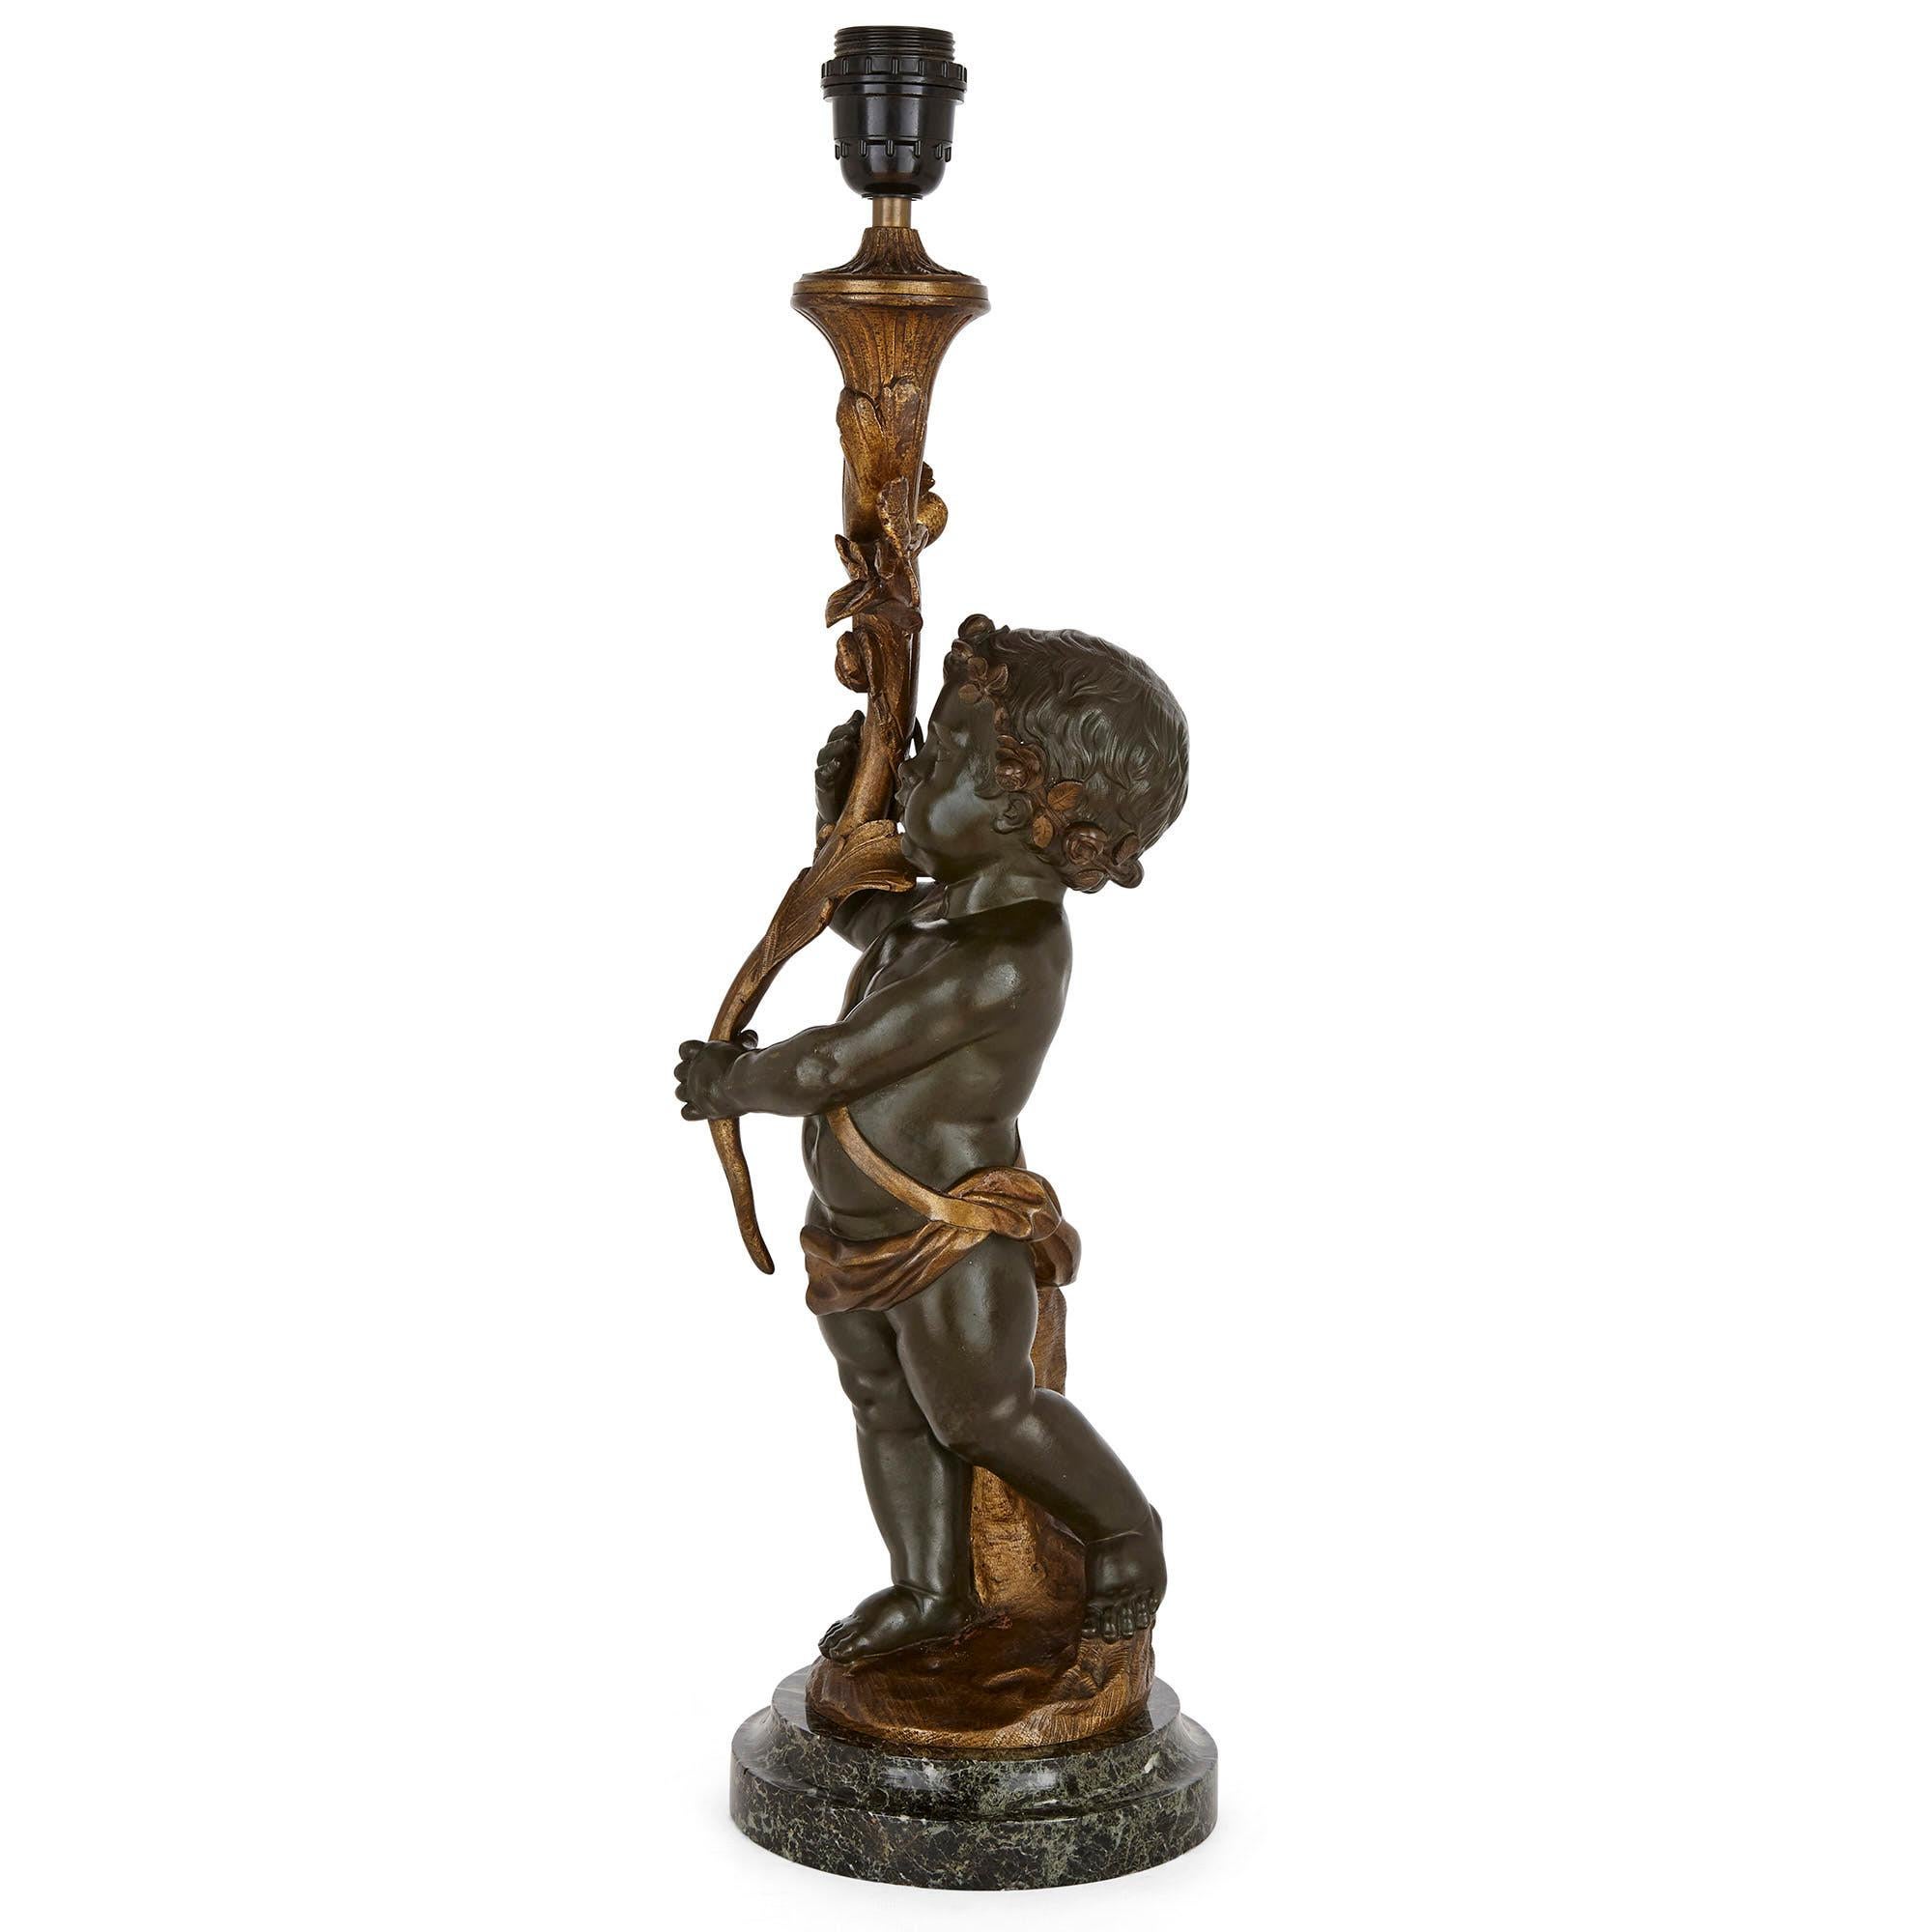 French patinated bronze lamp modelled as a putto
French, circa 1900
Measures: Height 61cm, diameter 18cm

Formed as a putto holding a wooden lamp, this Belle Époque piece is as much a work of sculpture as it is a functioning lamp. The putto,